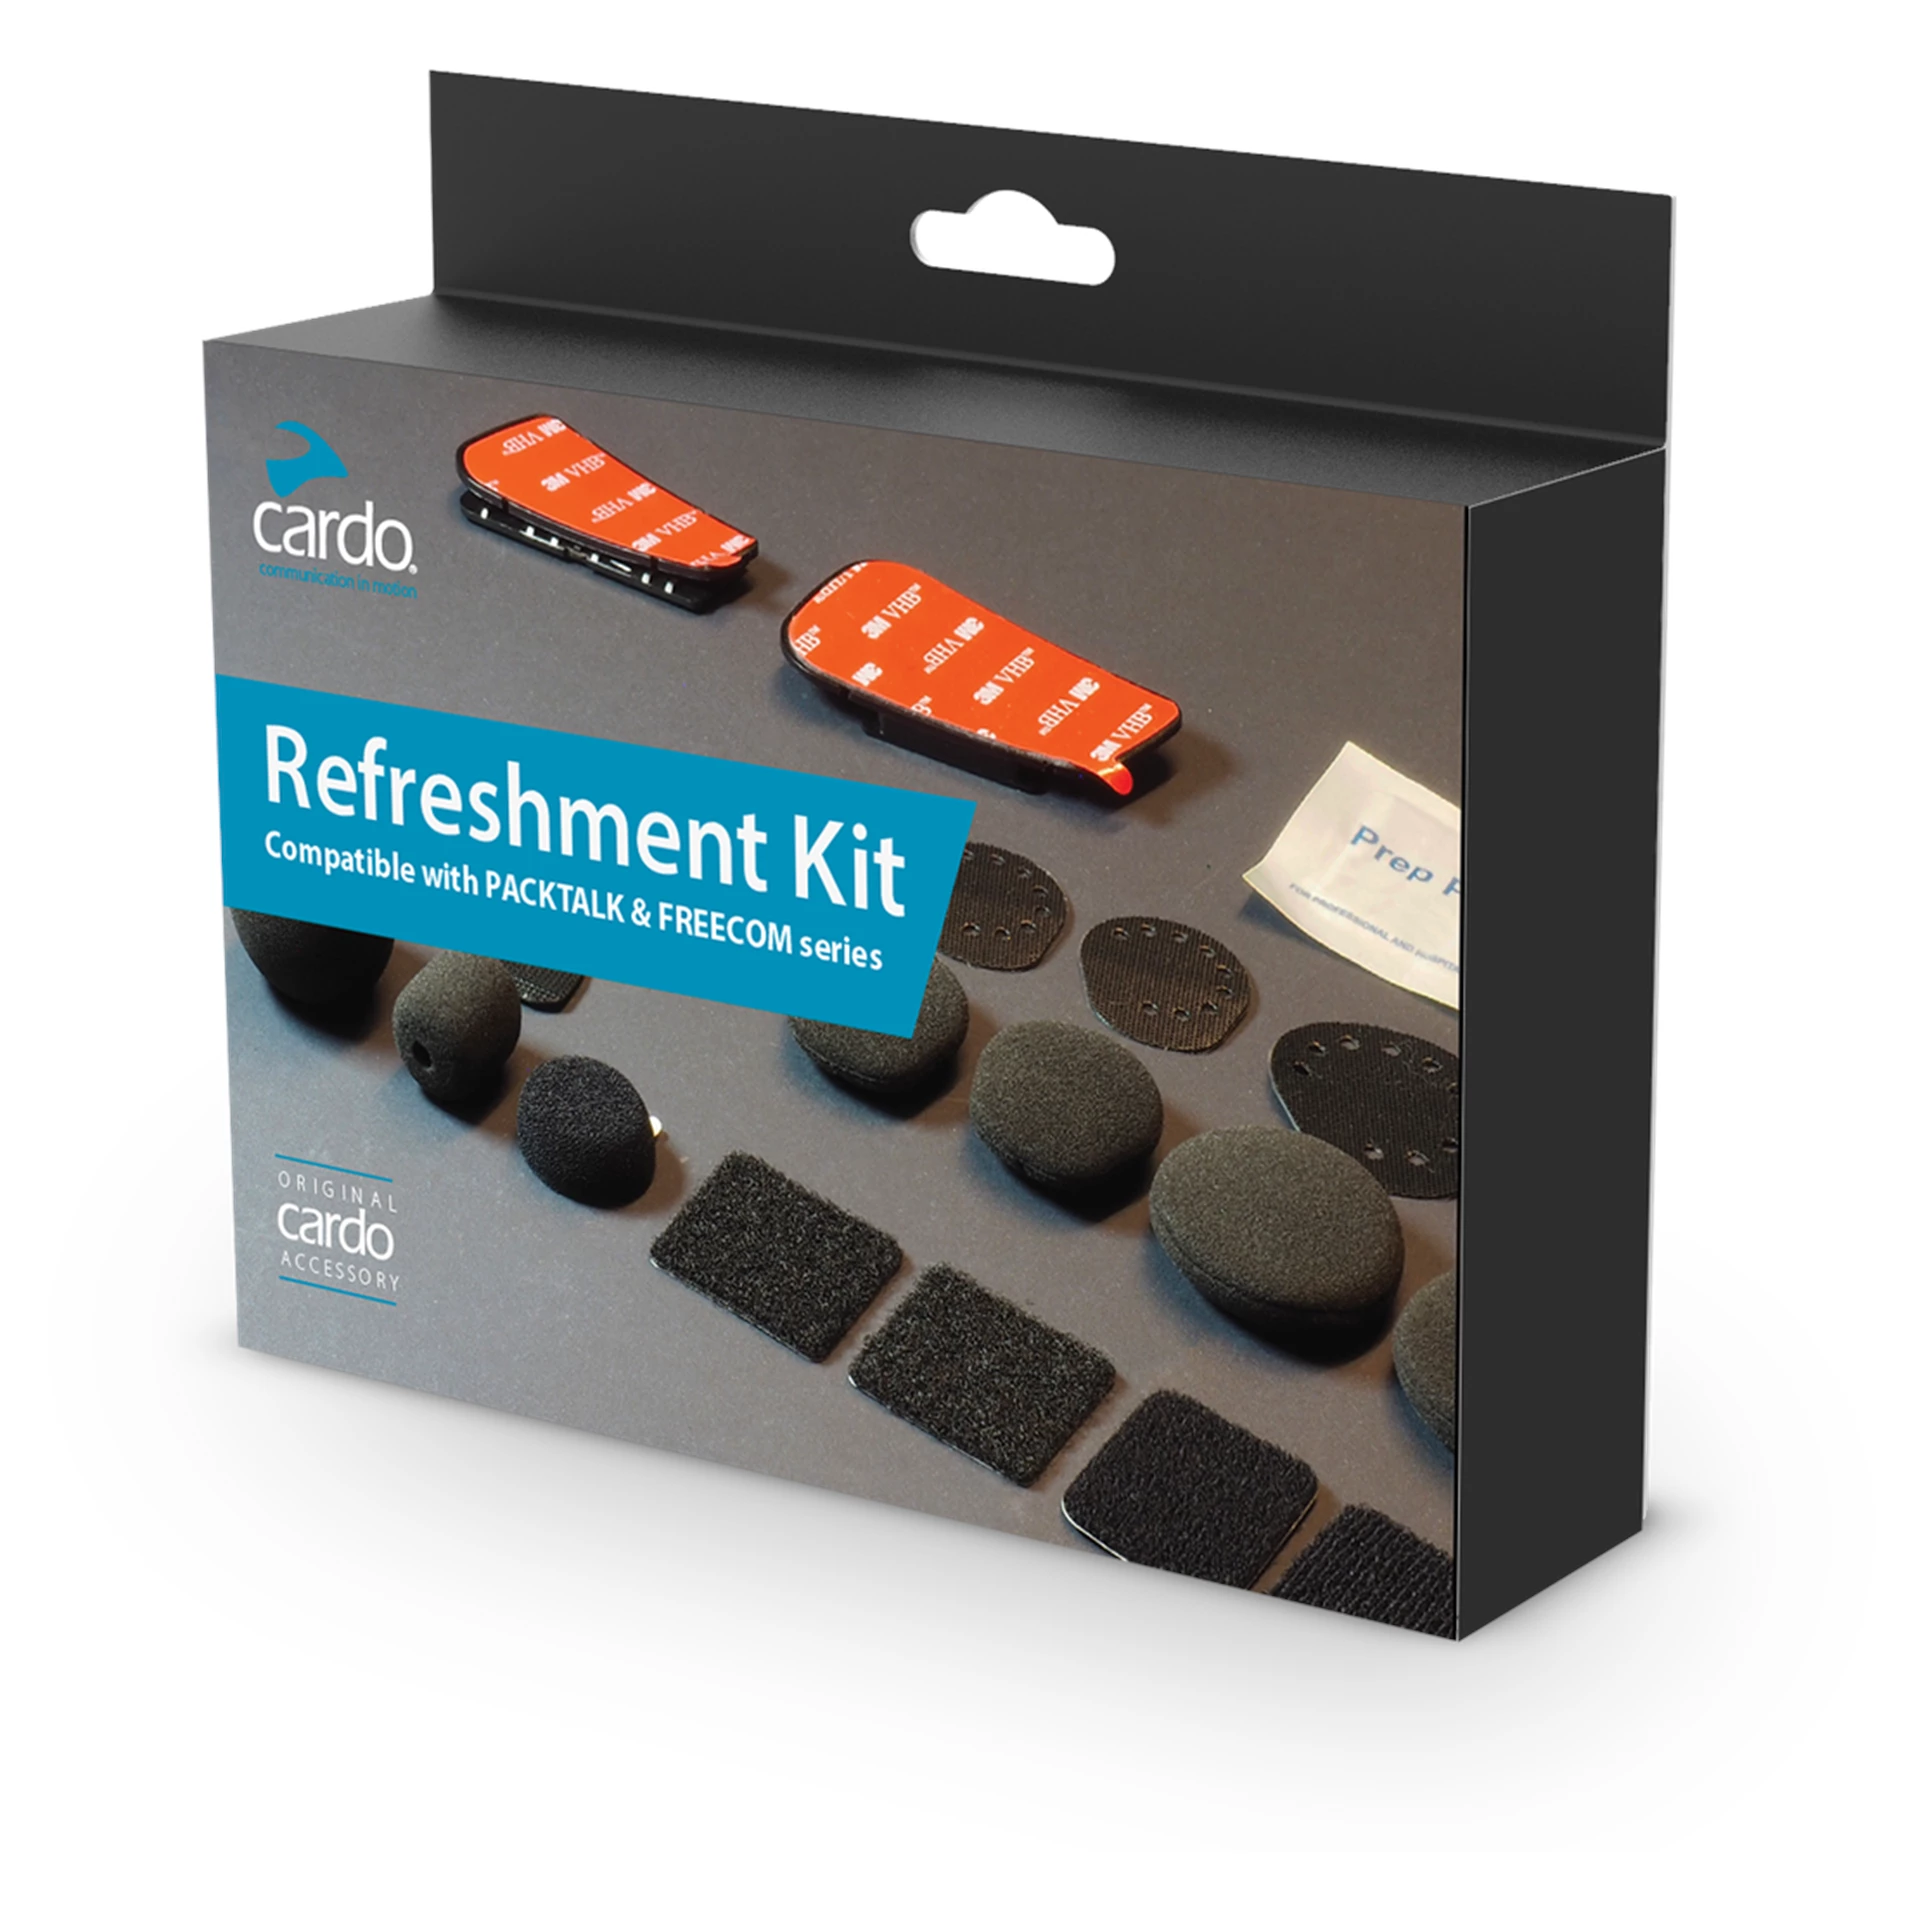 Refreshment Kit Package (1)